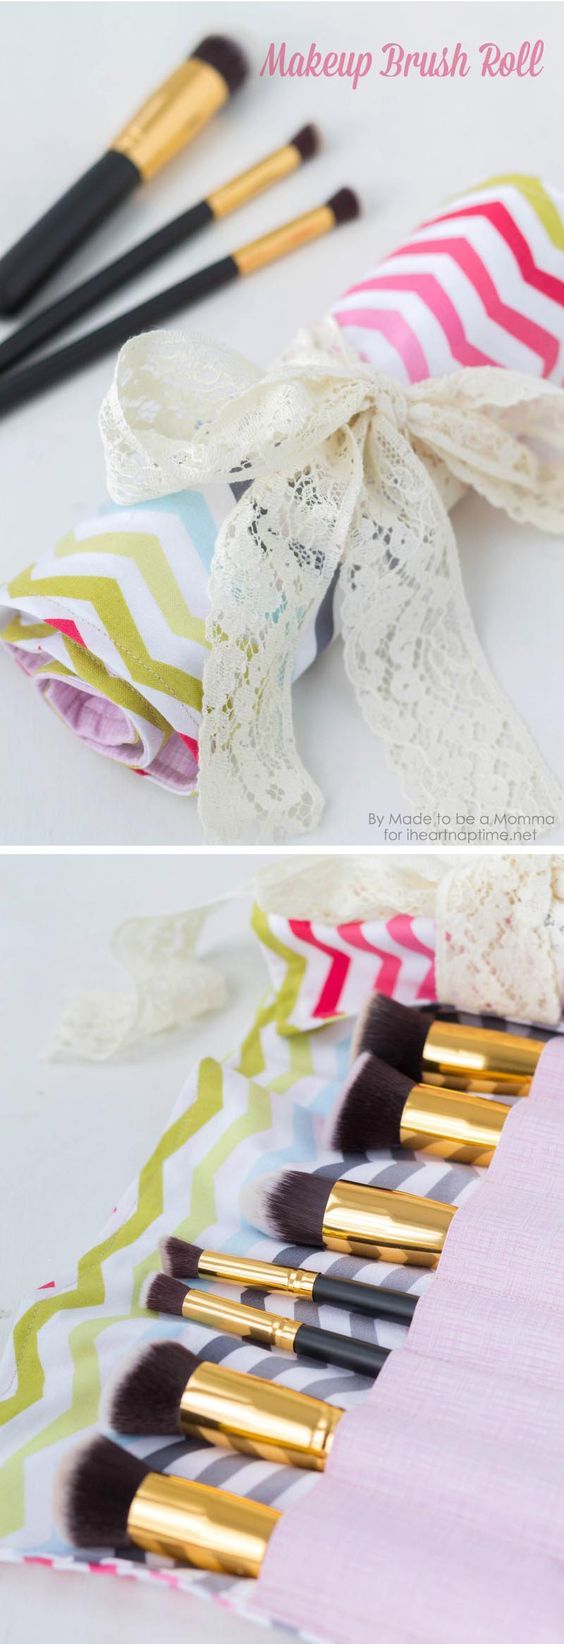 You’ll love how cute and easy these sewing projects are to whip up! So many br...